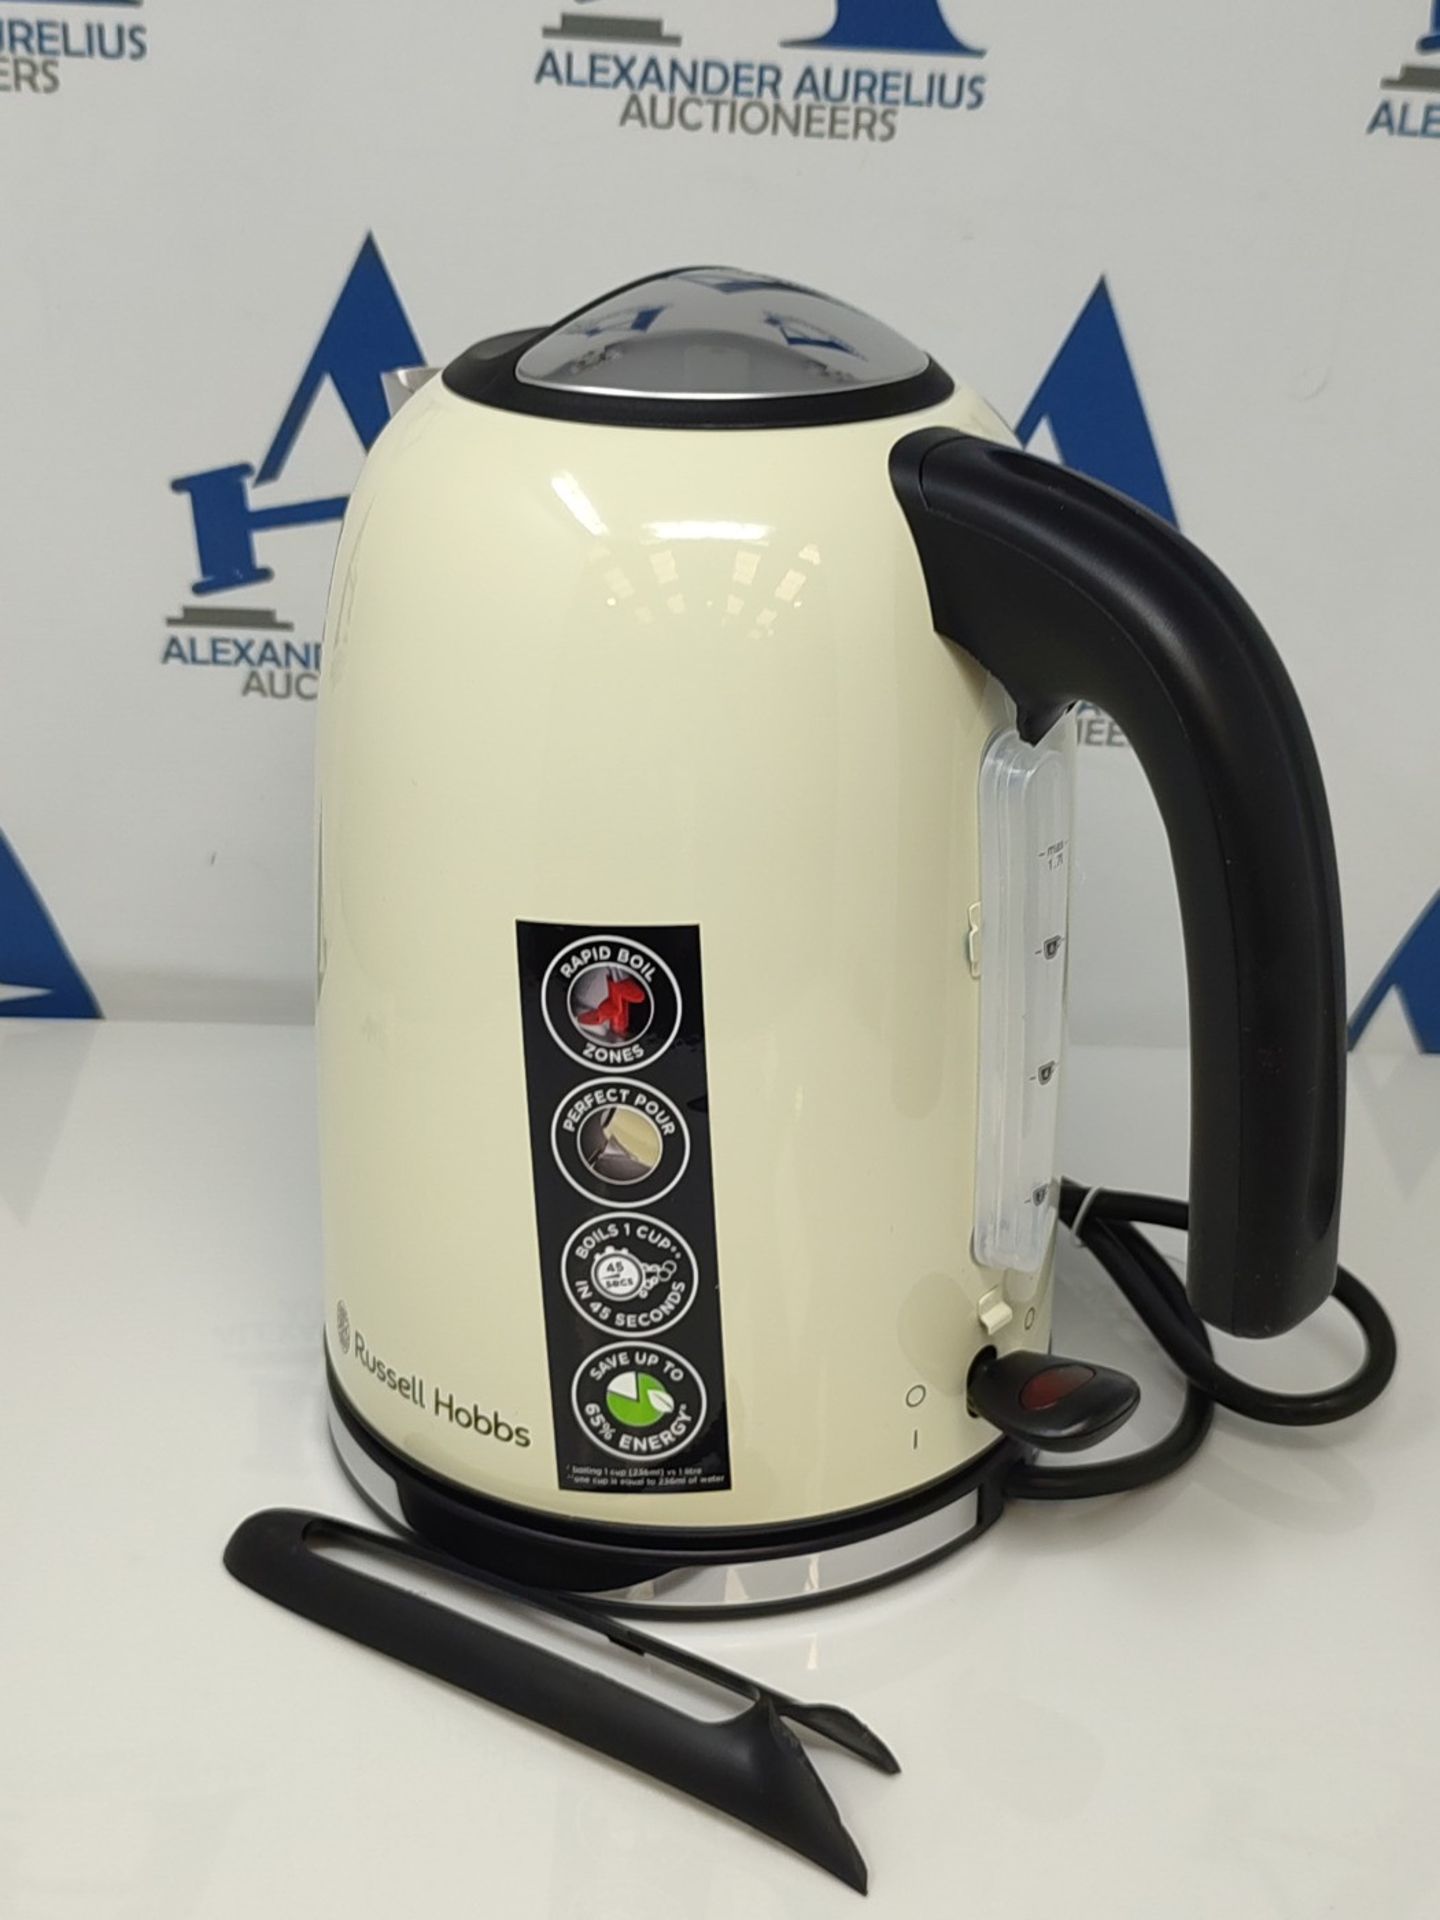 Russell Hobbs 20415 Stainless Steel Electric Kettle, 1.7 Litre, Cream - Image 3 of 3